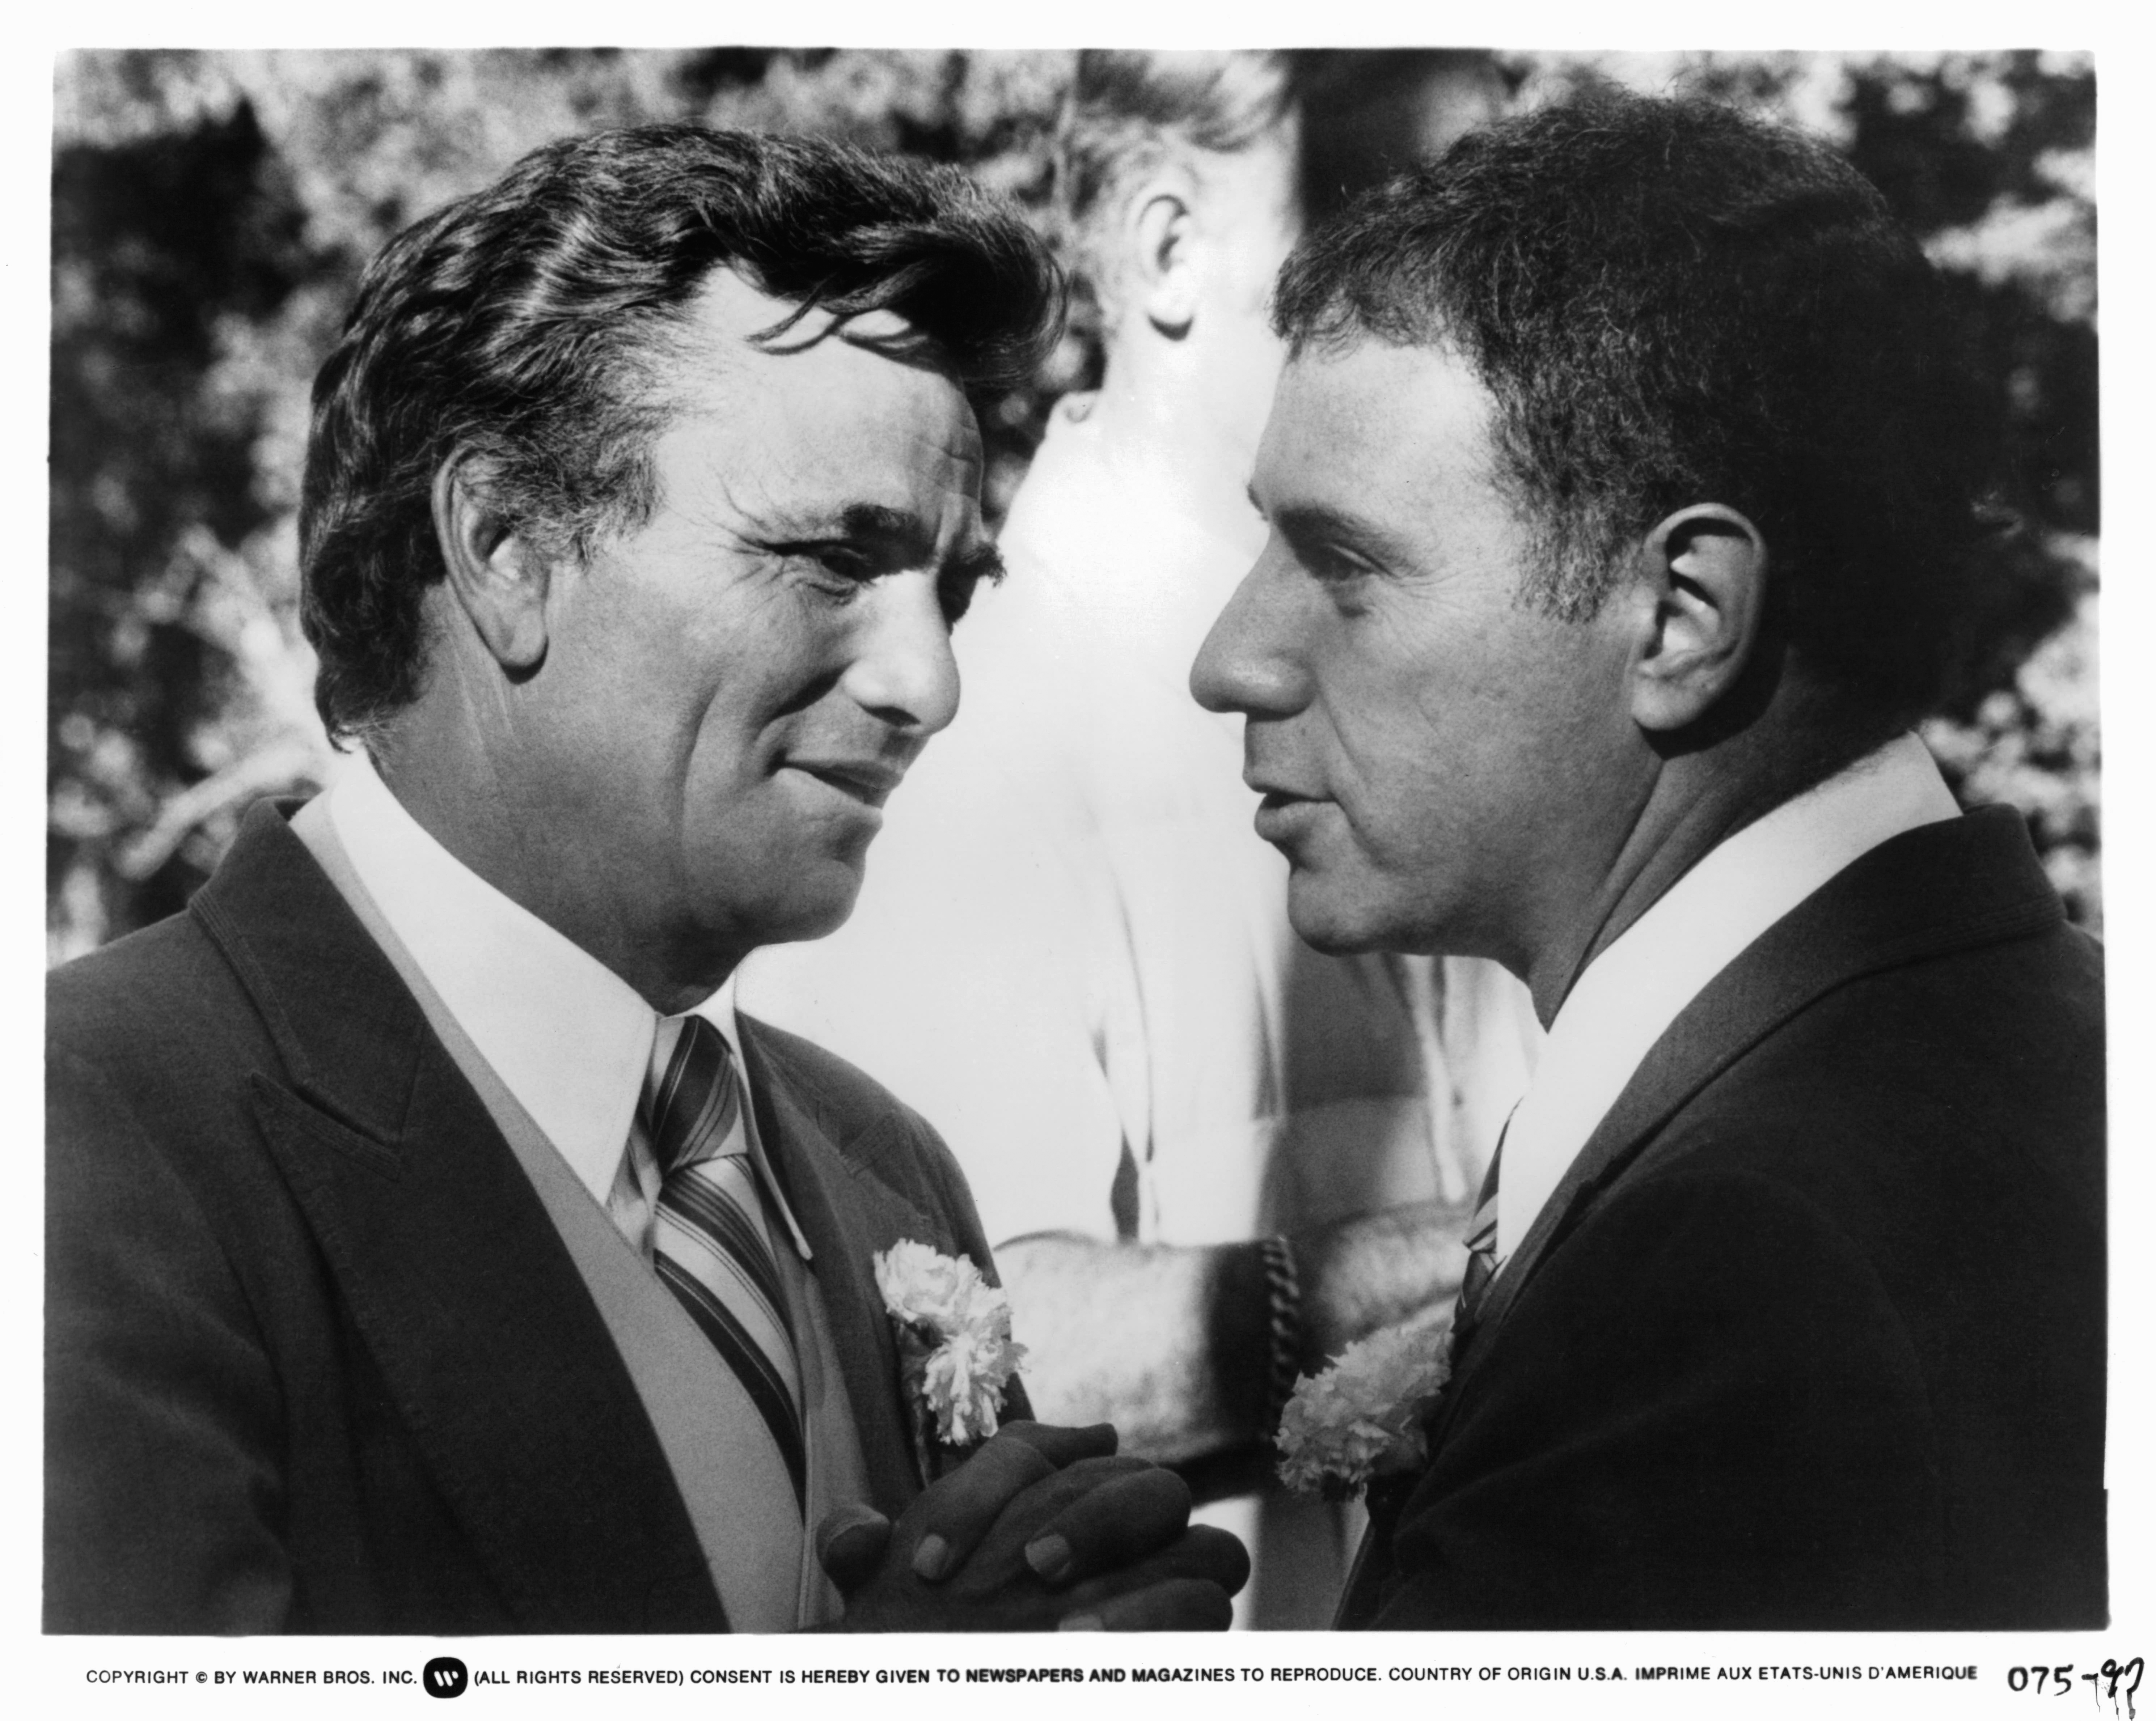 Still of Alan Arkin and Peter Falk in The In-Laws (1979)